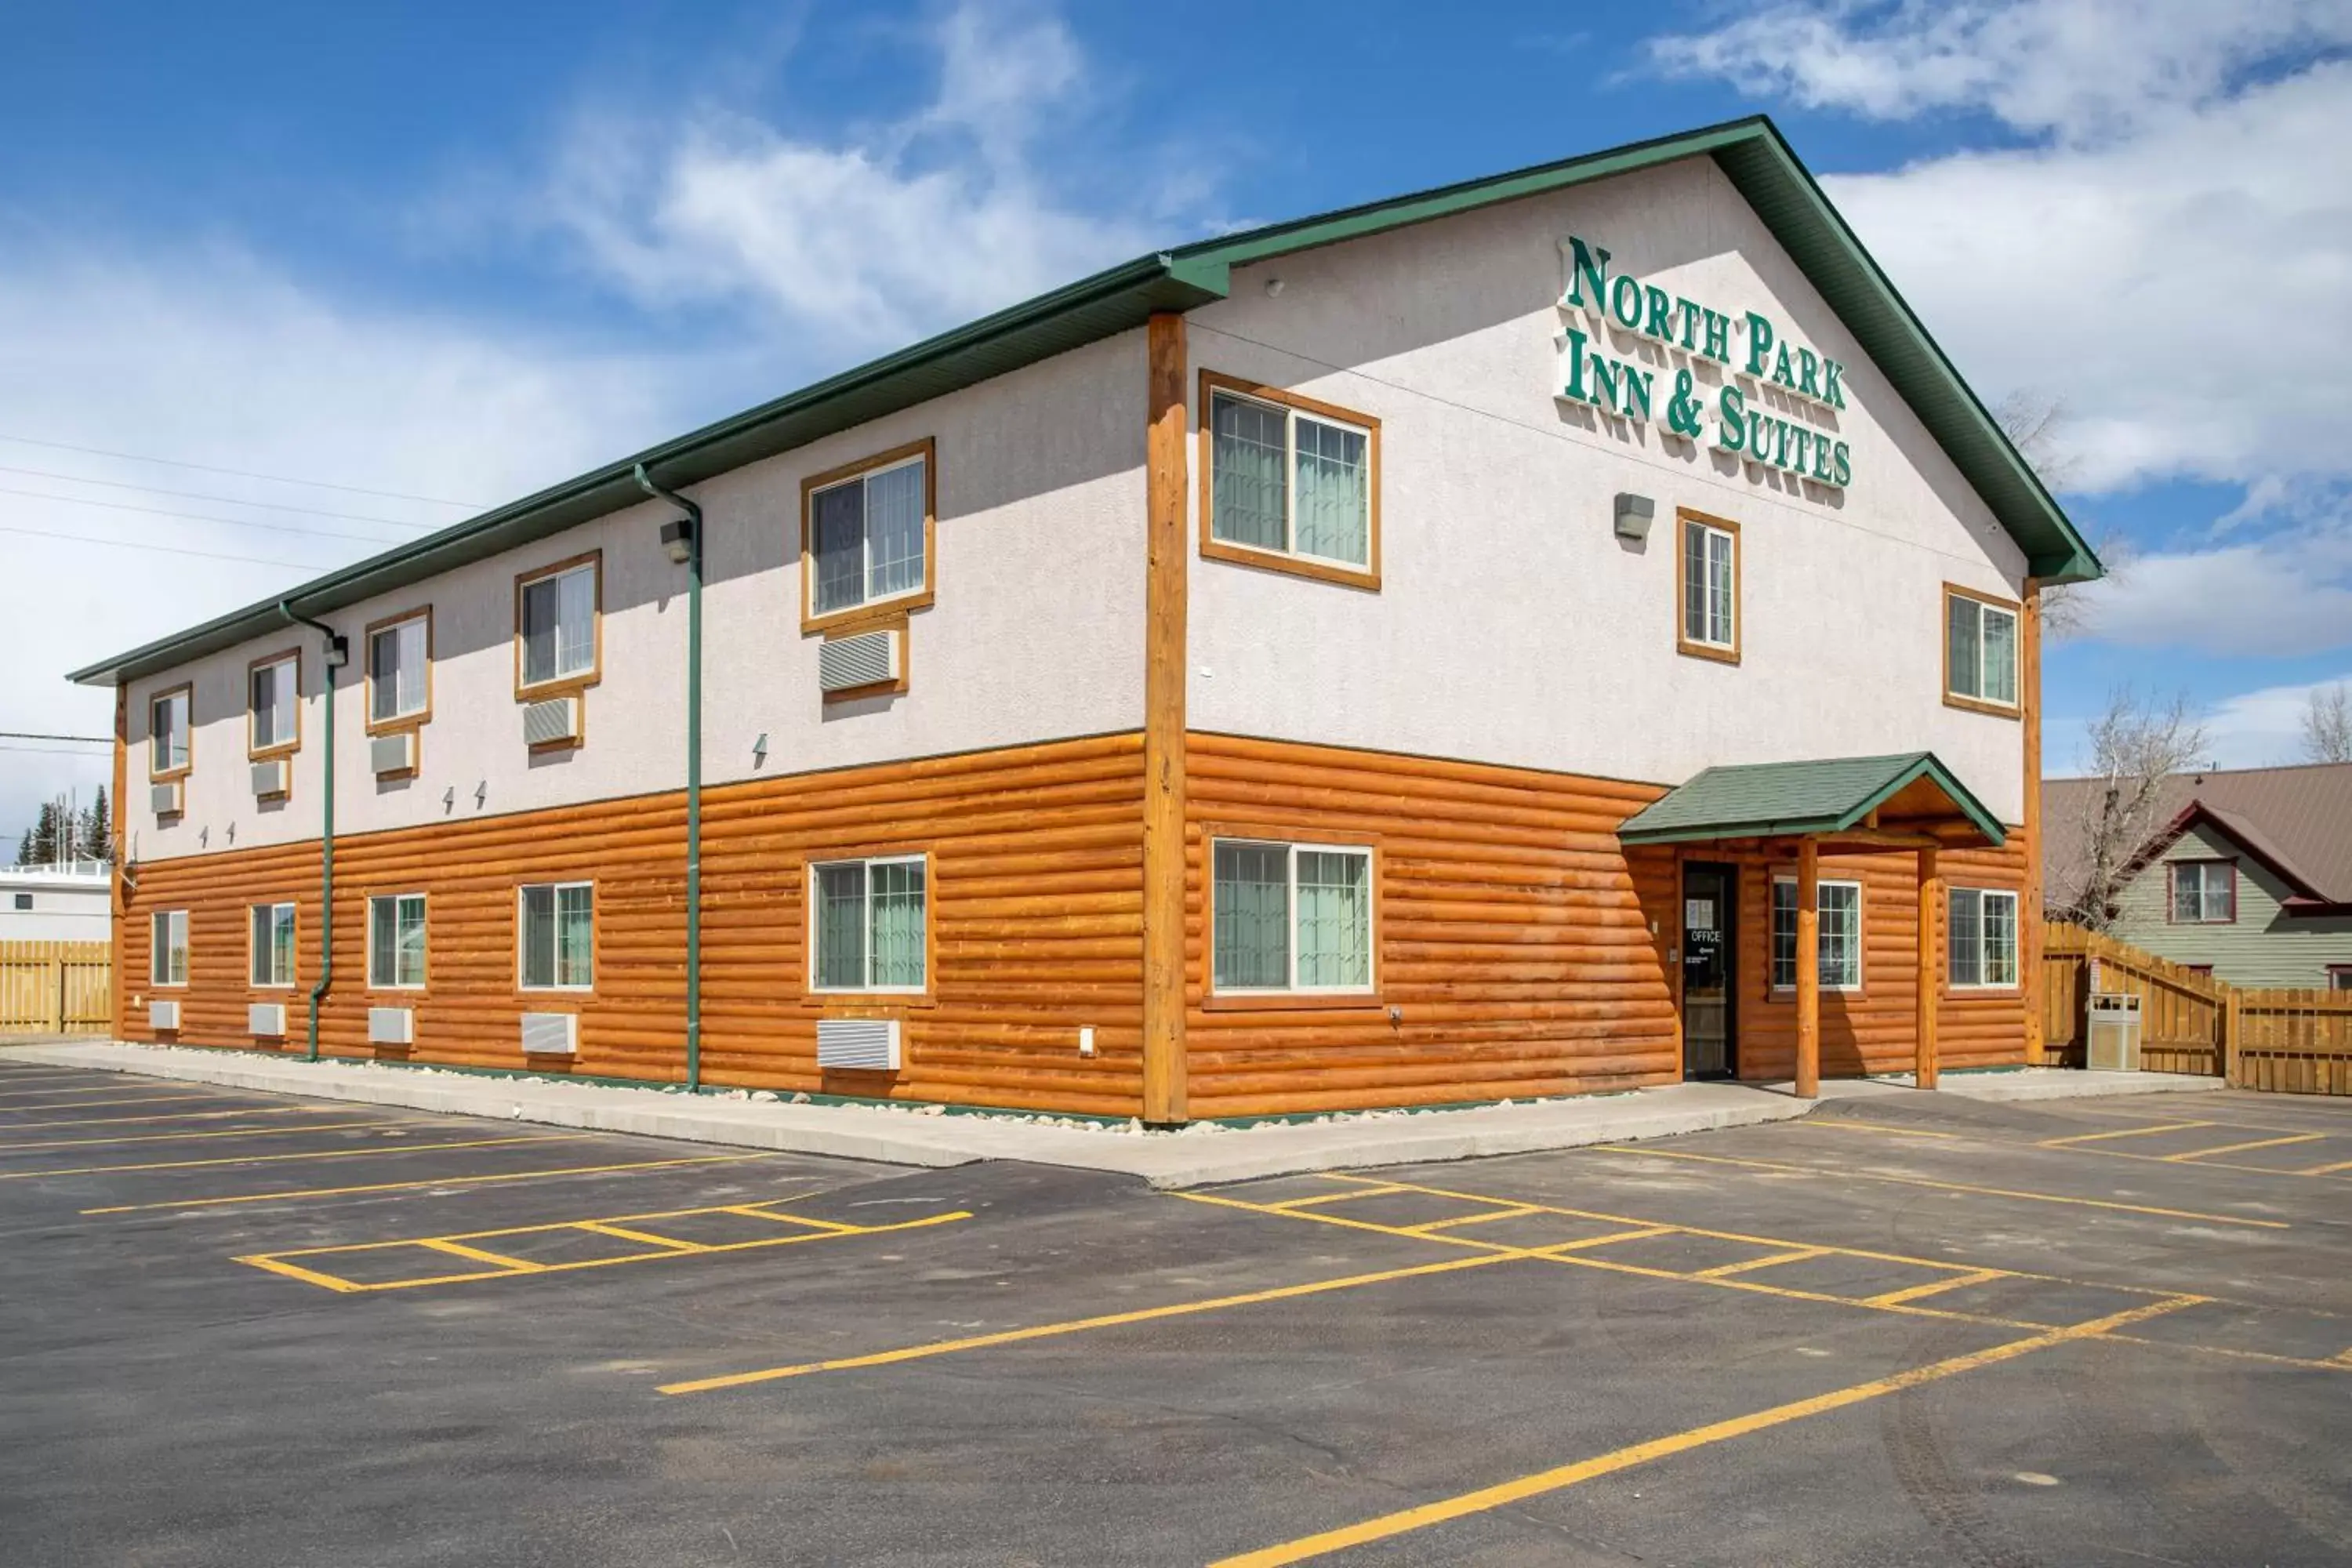 Property Building in North Park Inn & Suites